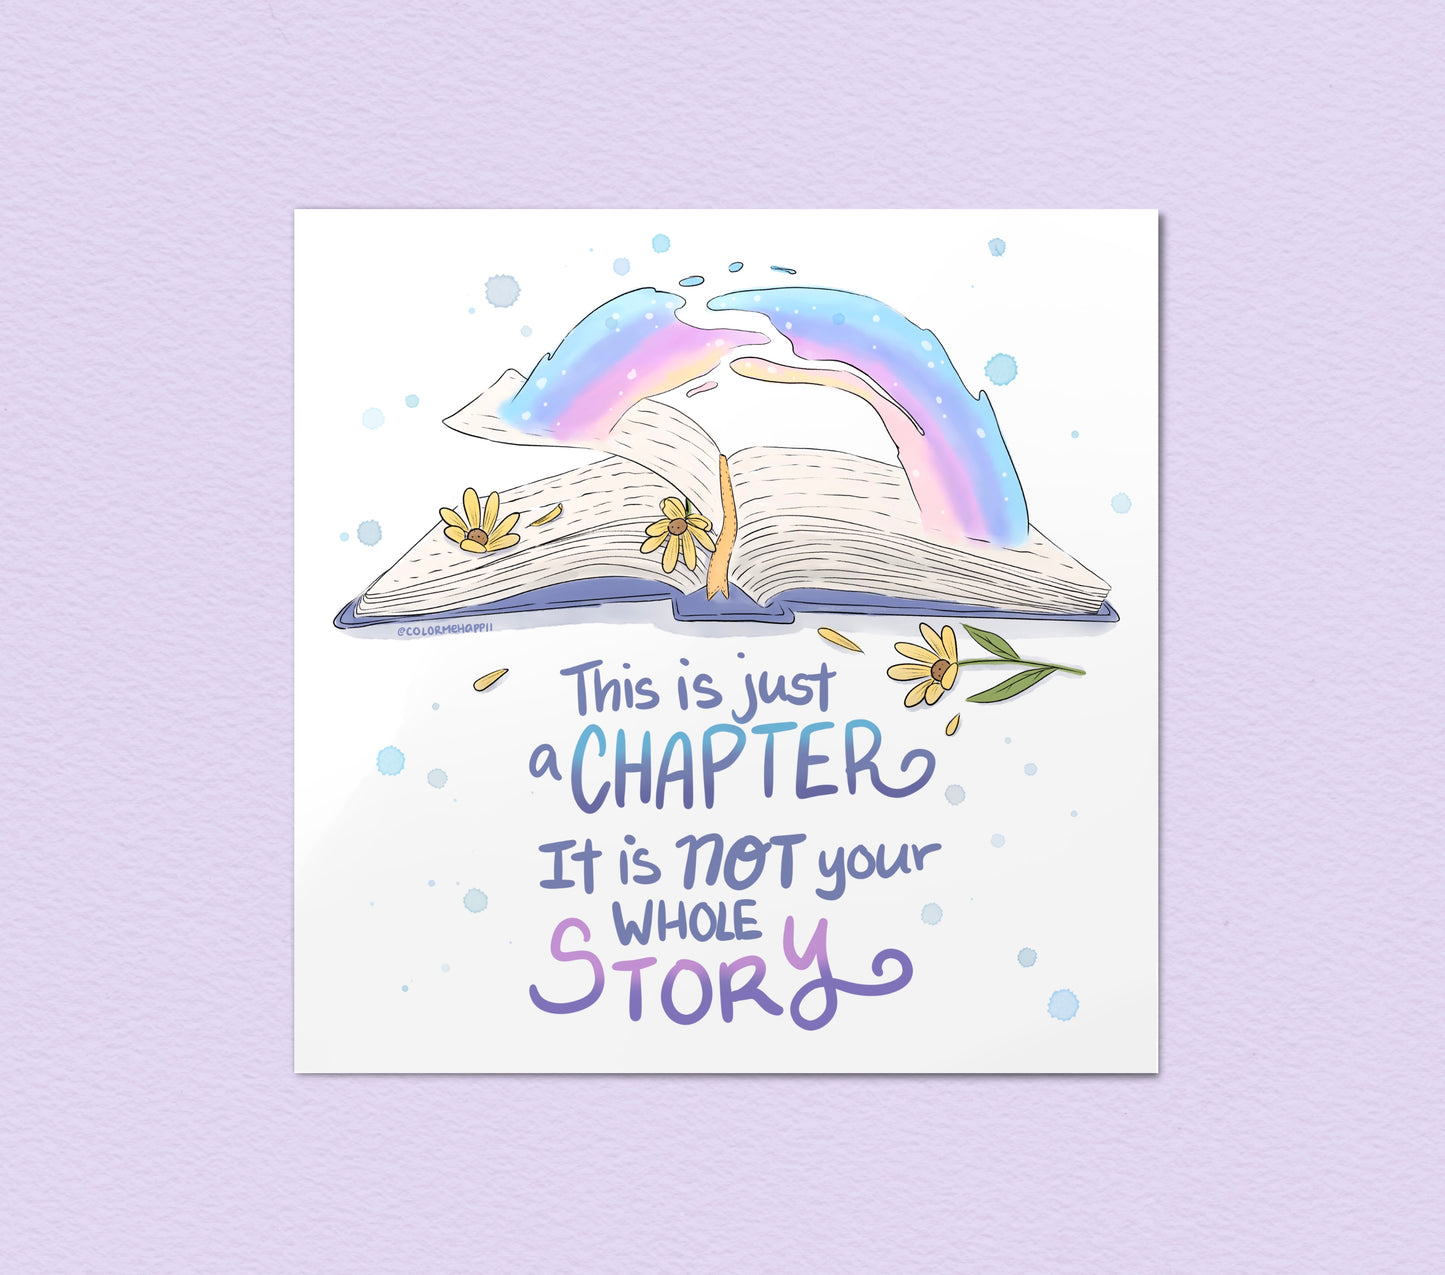 Not Your Whole Story - Art Print